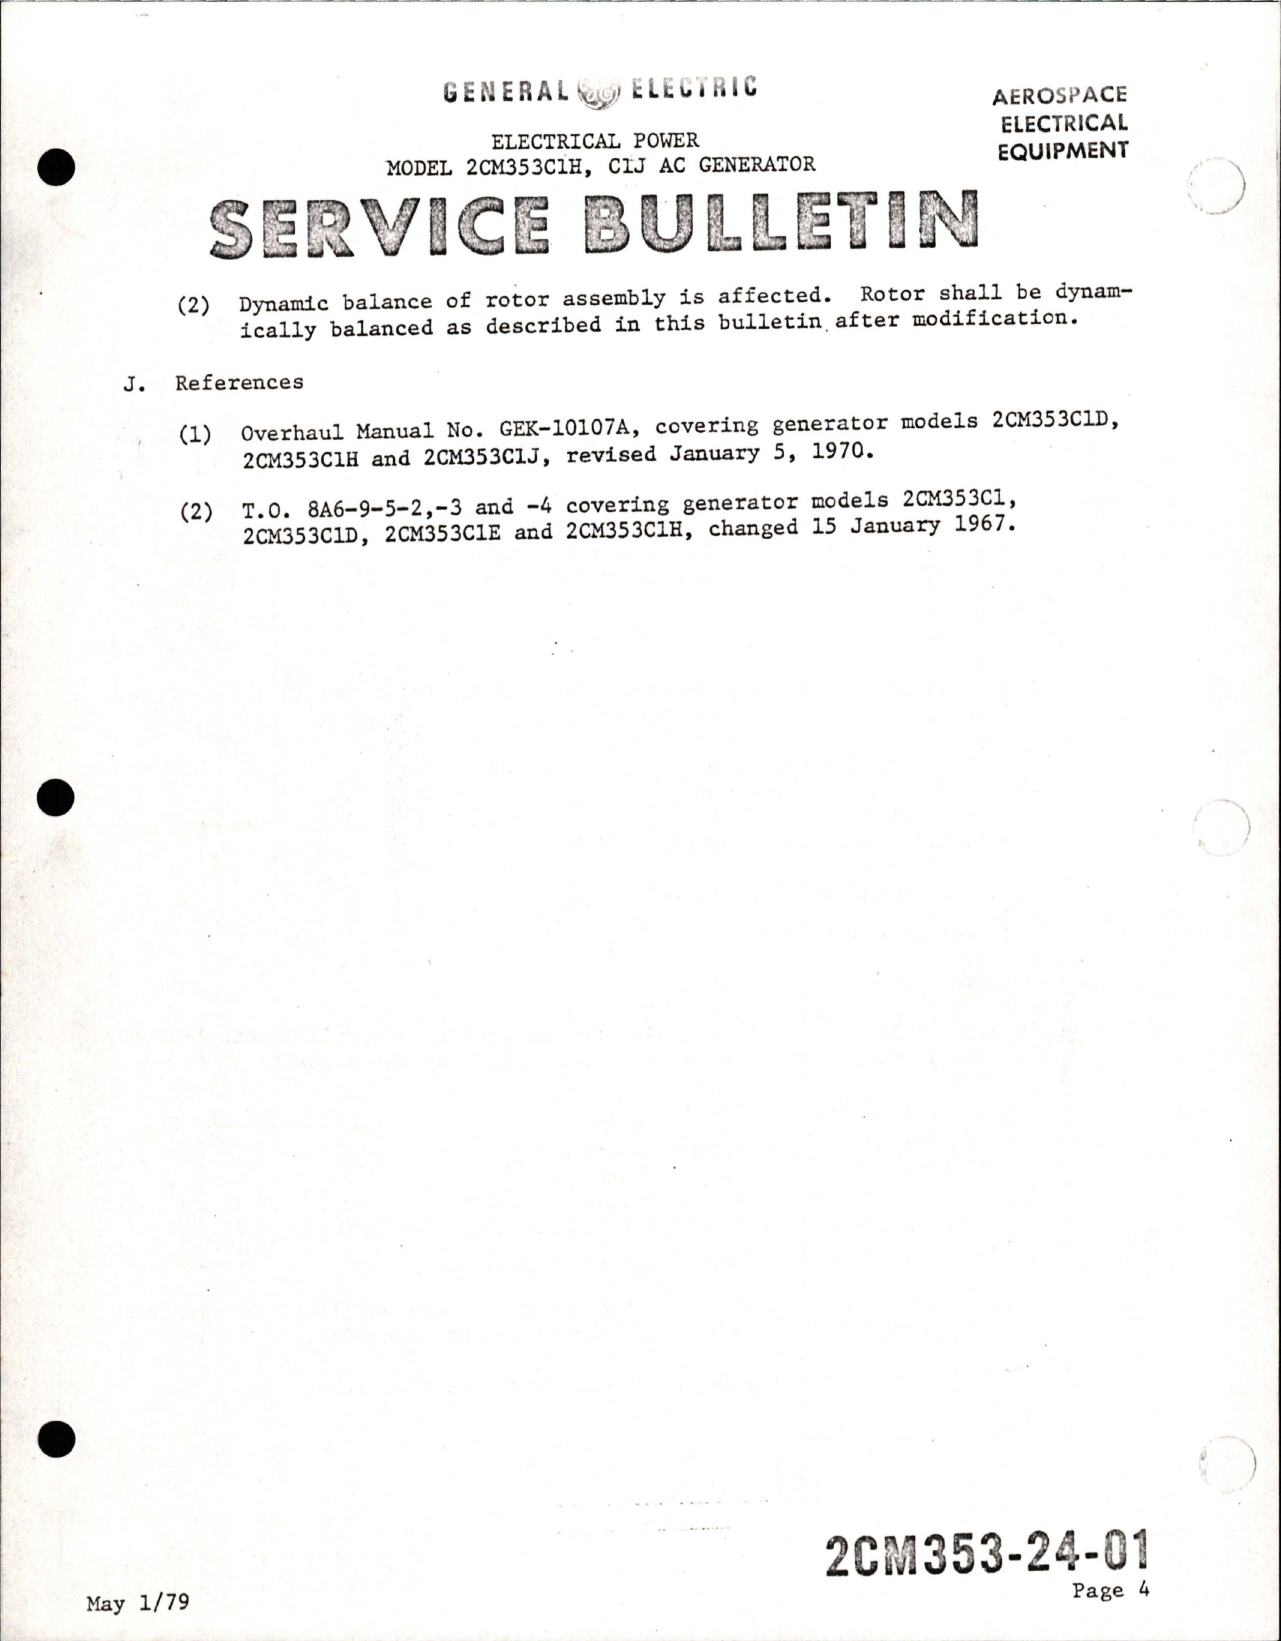 Sample page 5 from AirCorps Library document: Modification to Product Improved Configuration 2CM353C1K and 2CM353C1L - Revision 1 